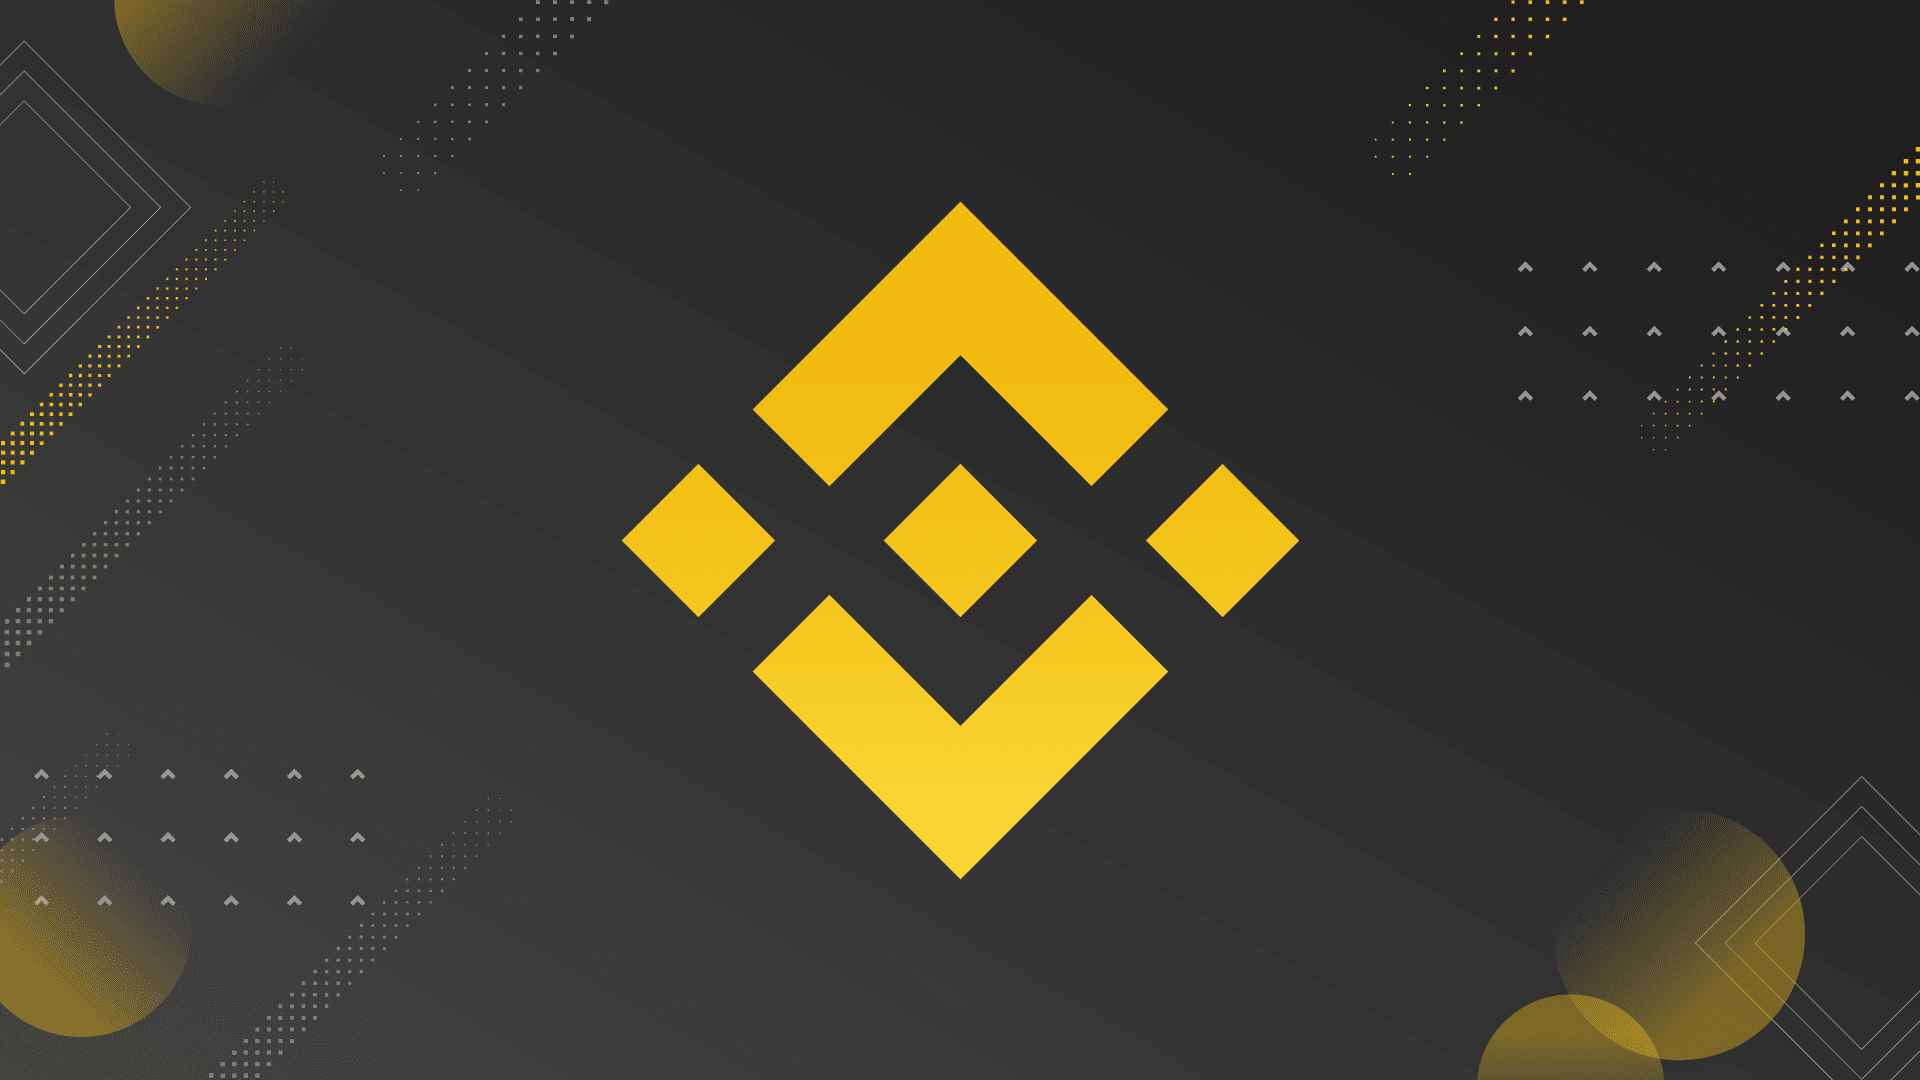 How to Buy Binance Coin (BNB) Without Binance